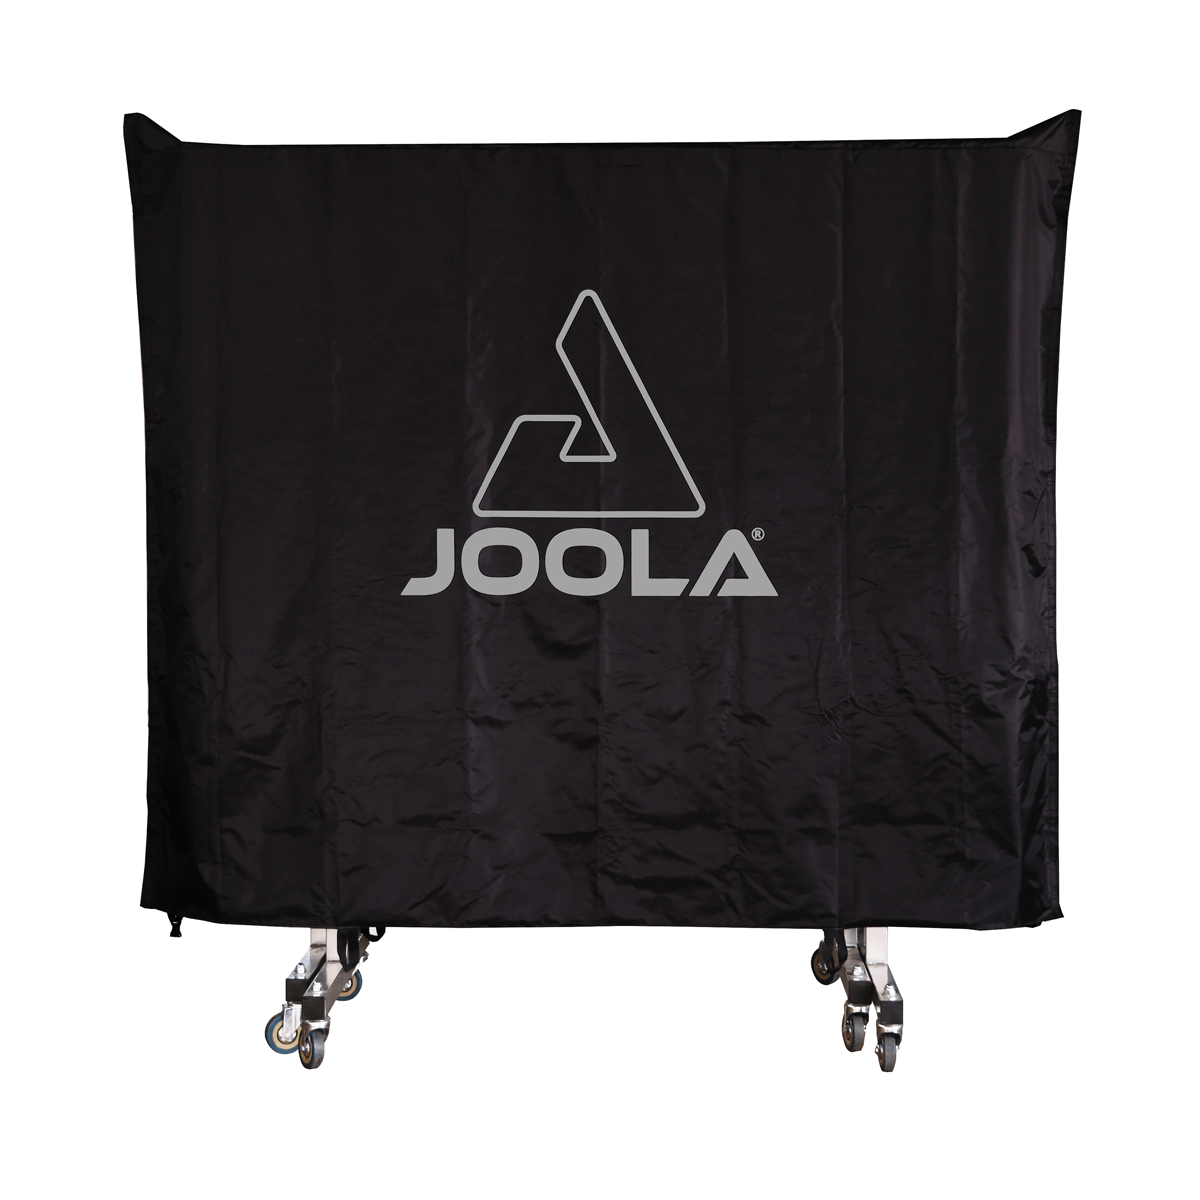 White Background Image: Black JOOLA All-Weather Table Cover with large white stacked JOOLA logo in the center, covering a table tennis table* in storage position (*table not included)